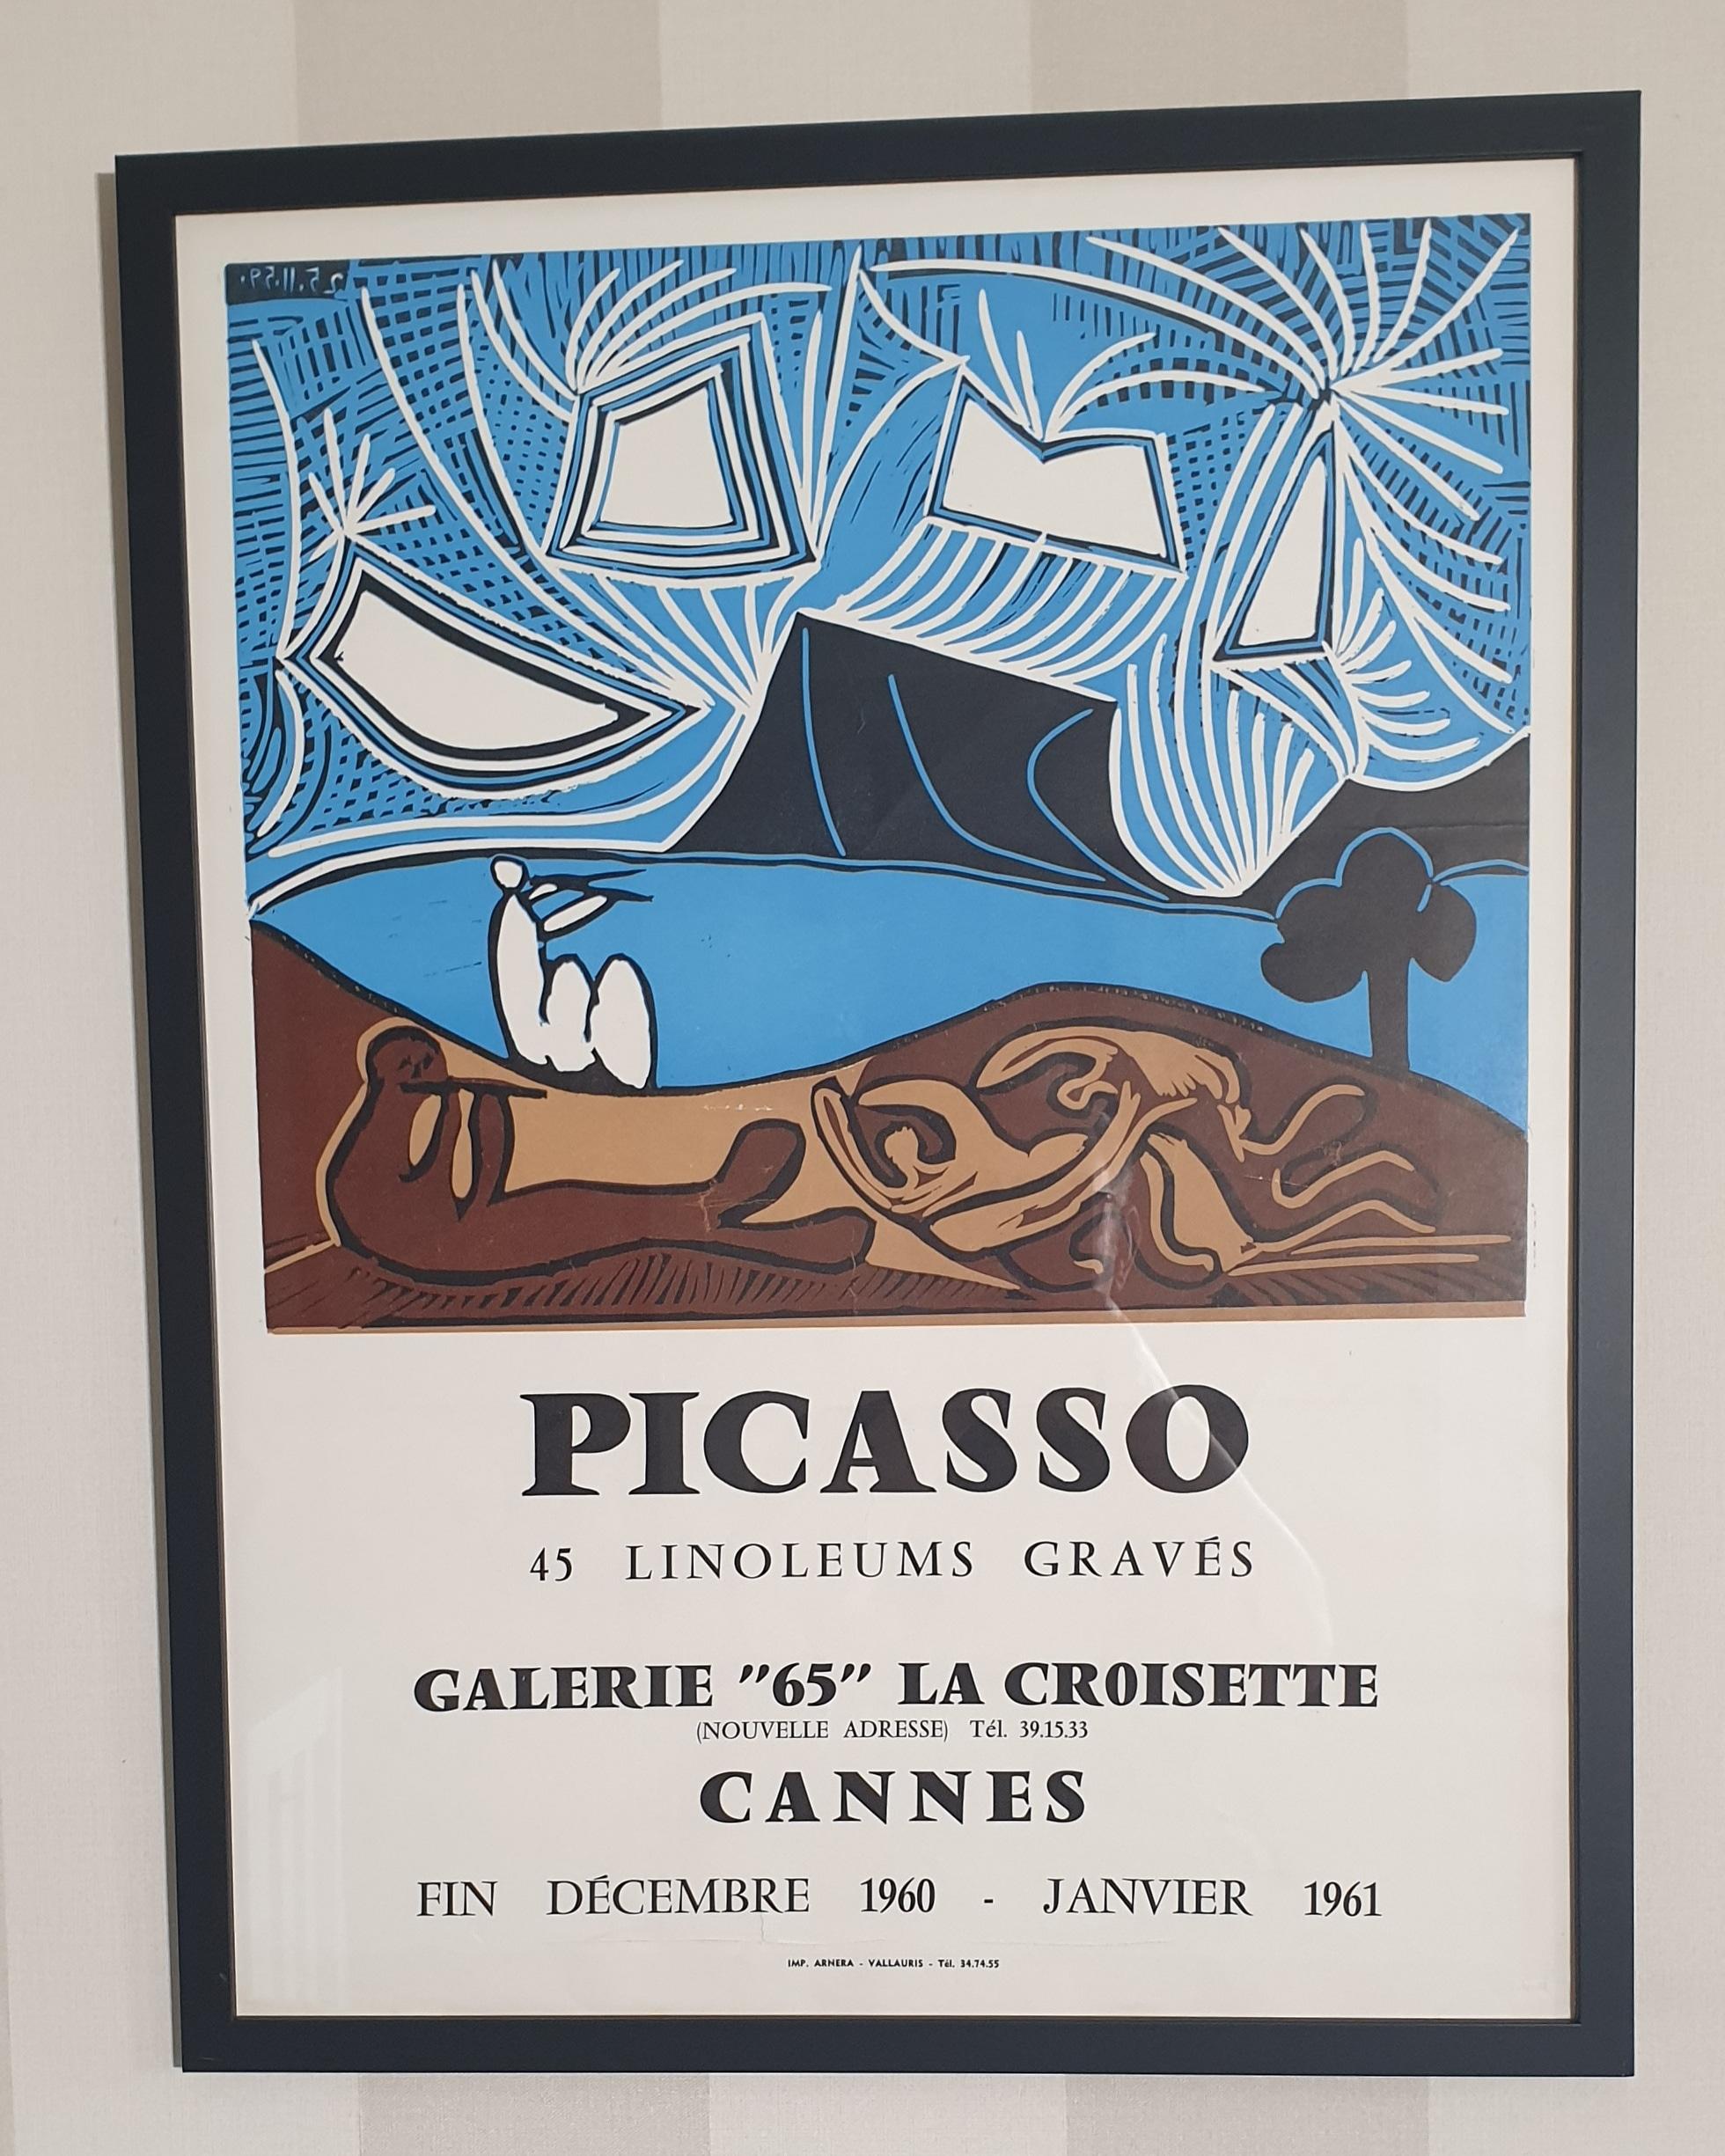 This poster is from a Picasso Exhibition in 1960 . The poster was created to market the exhibition of Lino Cuts created by Pablo Picasso. Posters from this era are now scarce. The poster was printed by the renowned French prinmaker Mouralt who